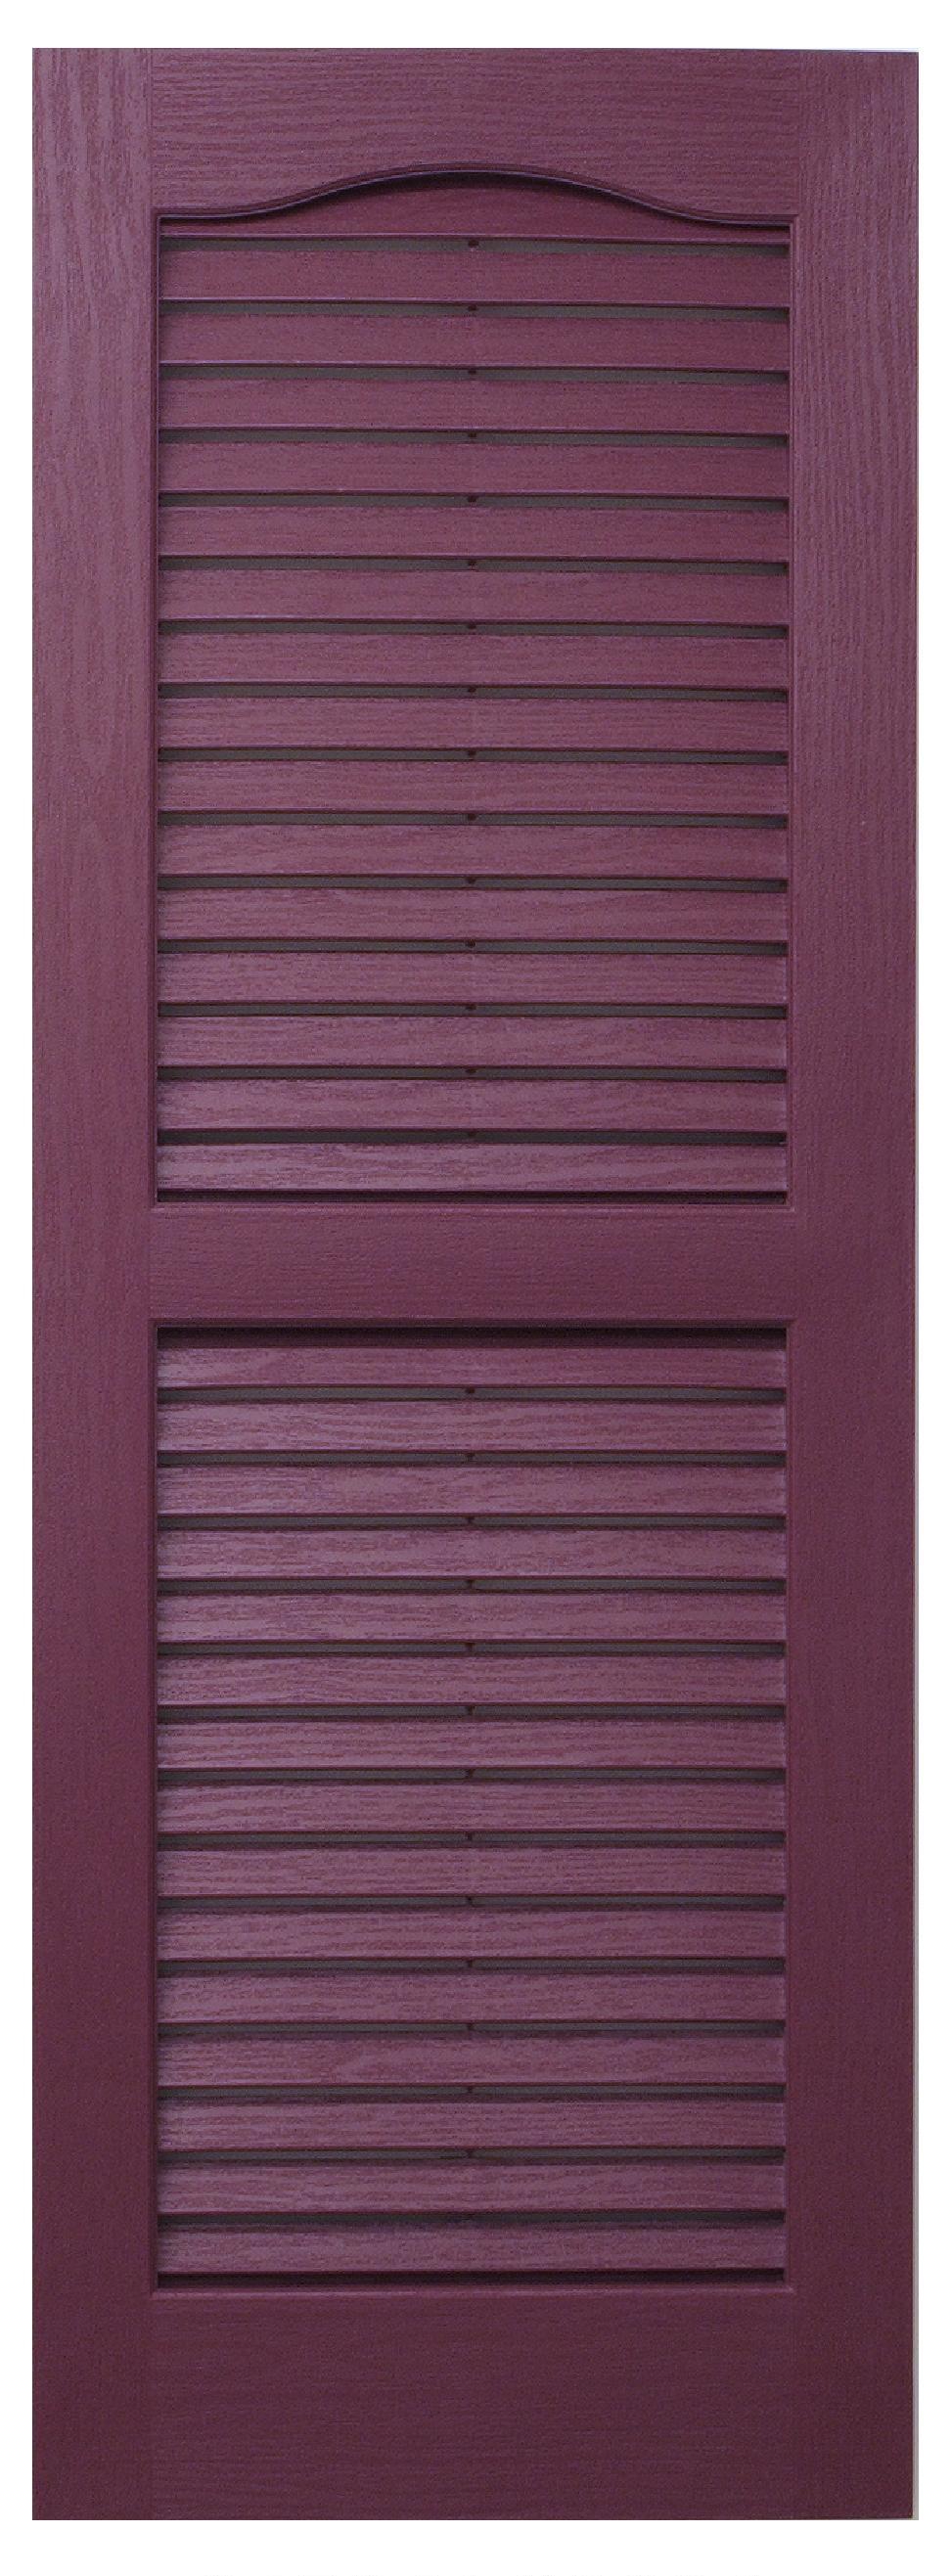 Shutters Severe Weather 2-Pack 3 color Raised/Louvered Panel 15x47in.Vinyl Ext 